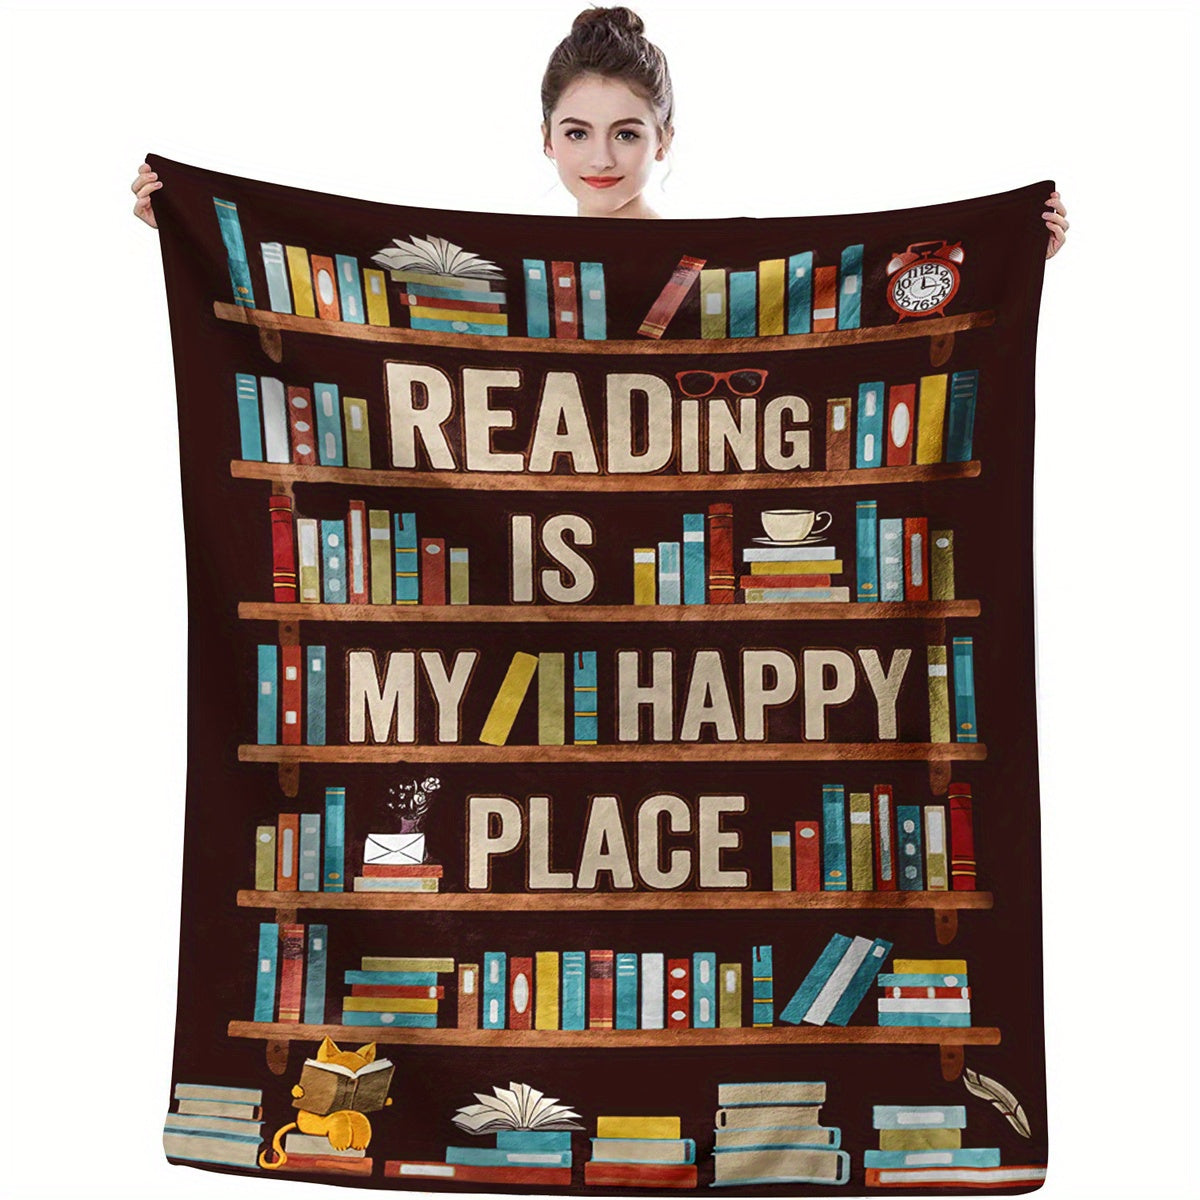 Flannel Throw Blanket - "Reading is My Happy Place"